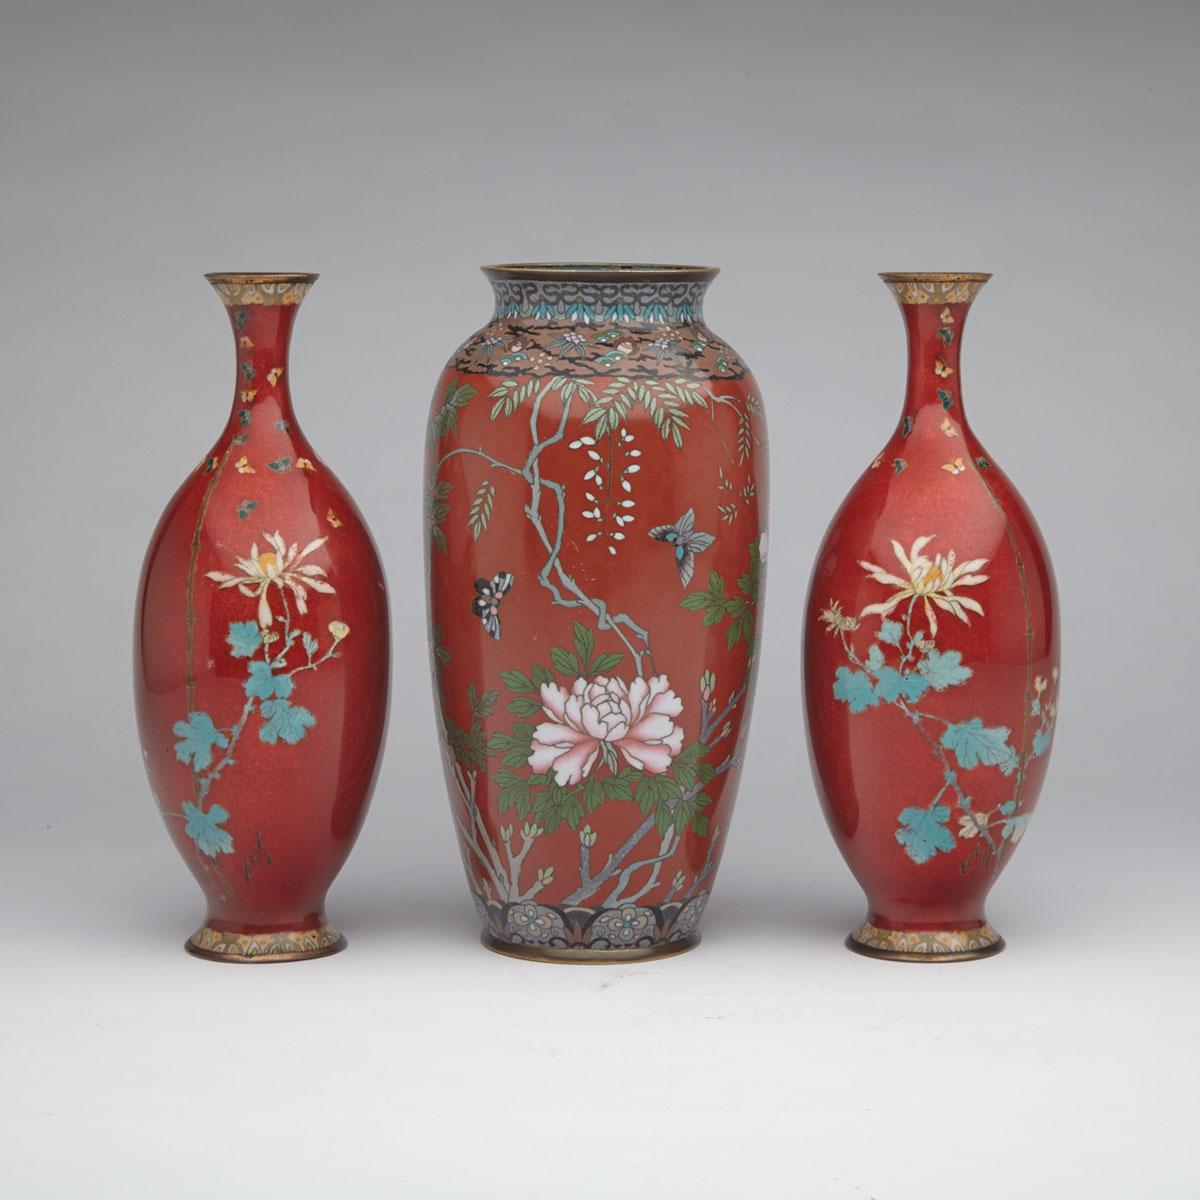 Three Red Ground Cloisonné Enamel Vases, Japan, Early 20th Century